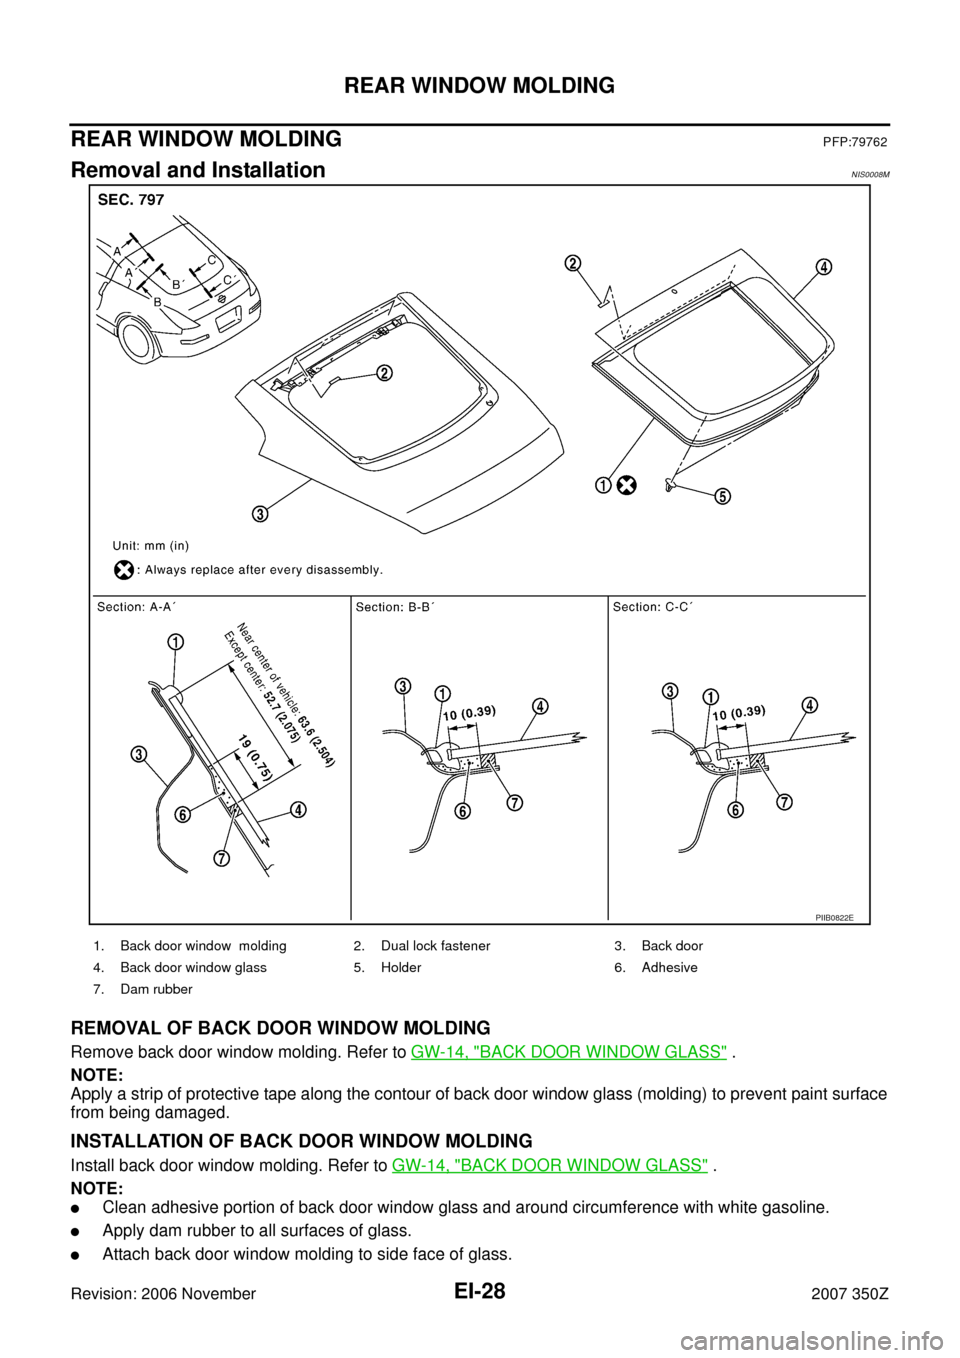 NISSAN 350Z 2007 Z33 Exterior And Interior Owners Manual EI-28
REAR WINDOW MOLDING
Revision: 2006 November2007 350Z
REAR WINDOW MOLDINGPFP:79762
Removal and InstallationNIS0008M
REMOVAL OF BACK DOOR WINDOW MOLDING
Remove back door window molding. Refer to G